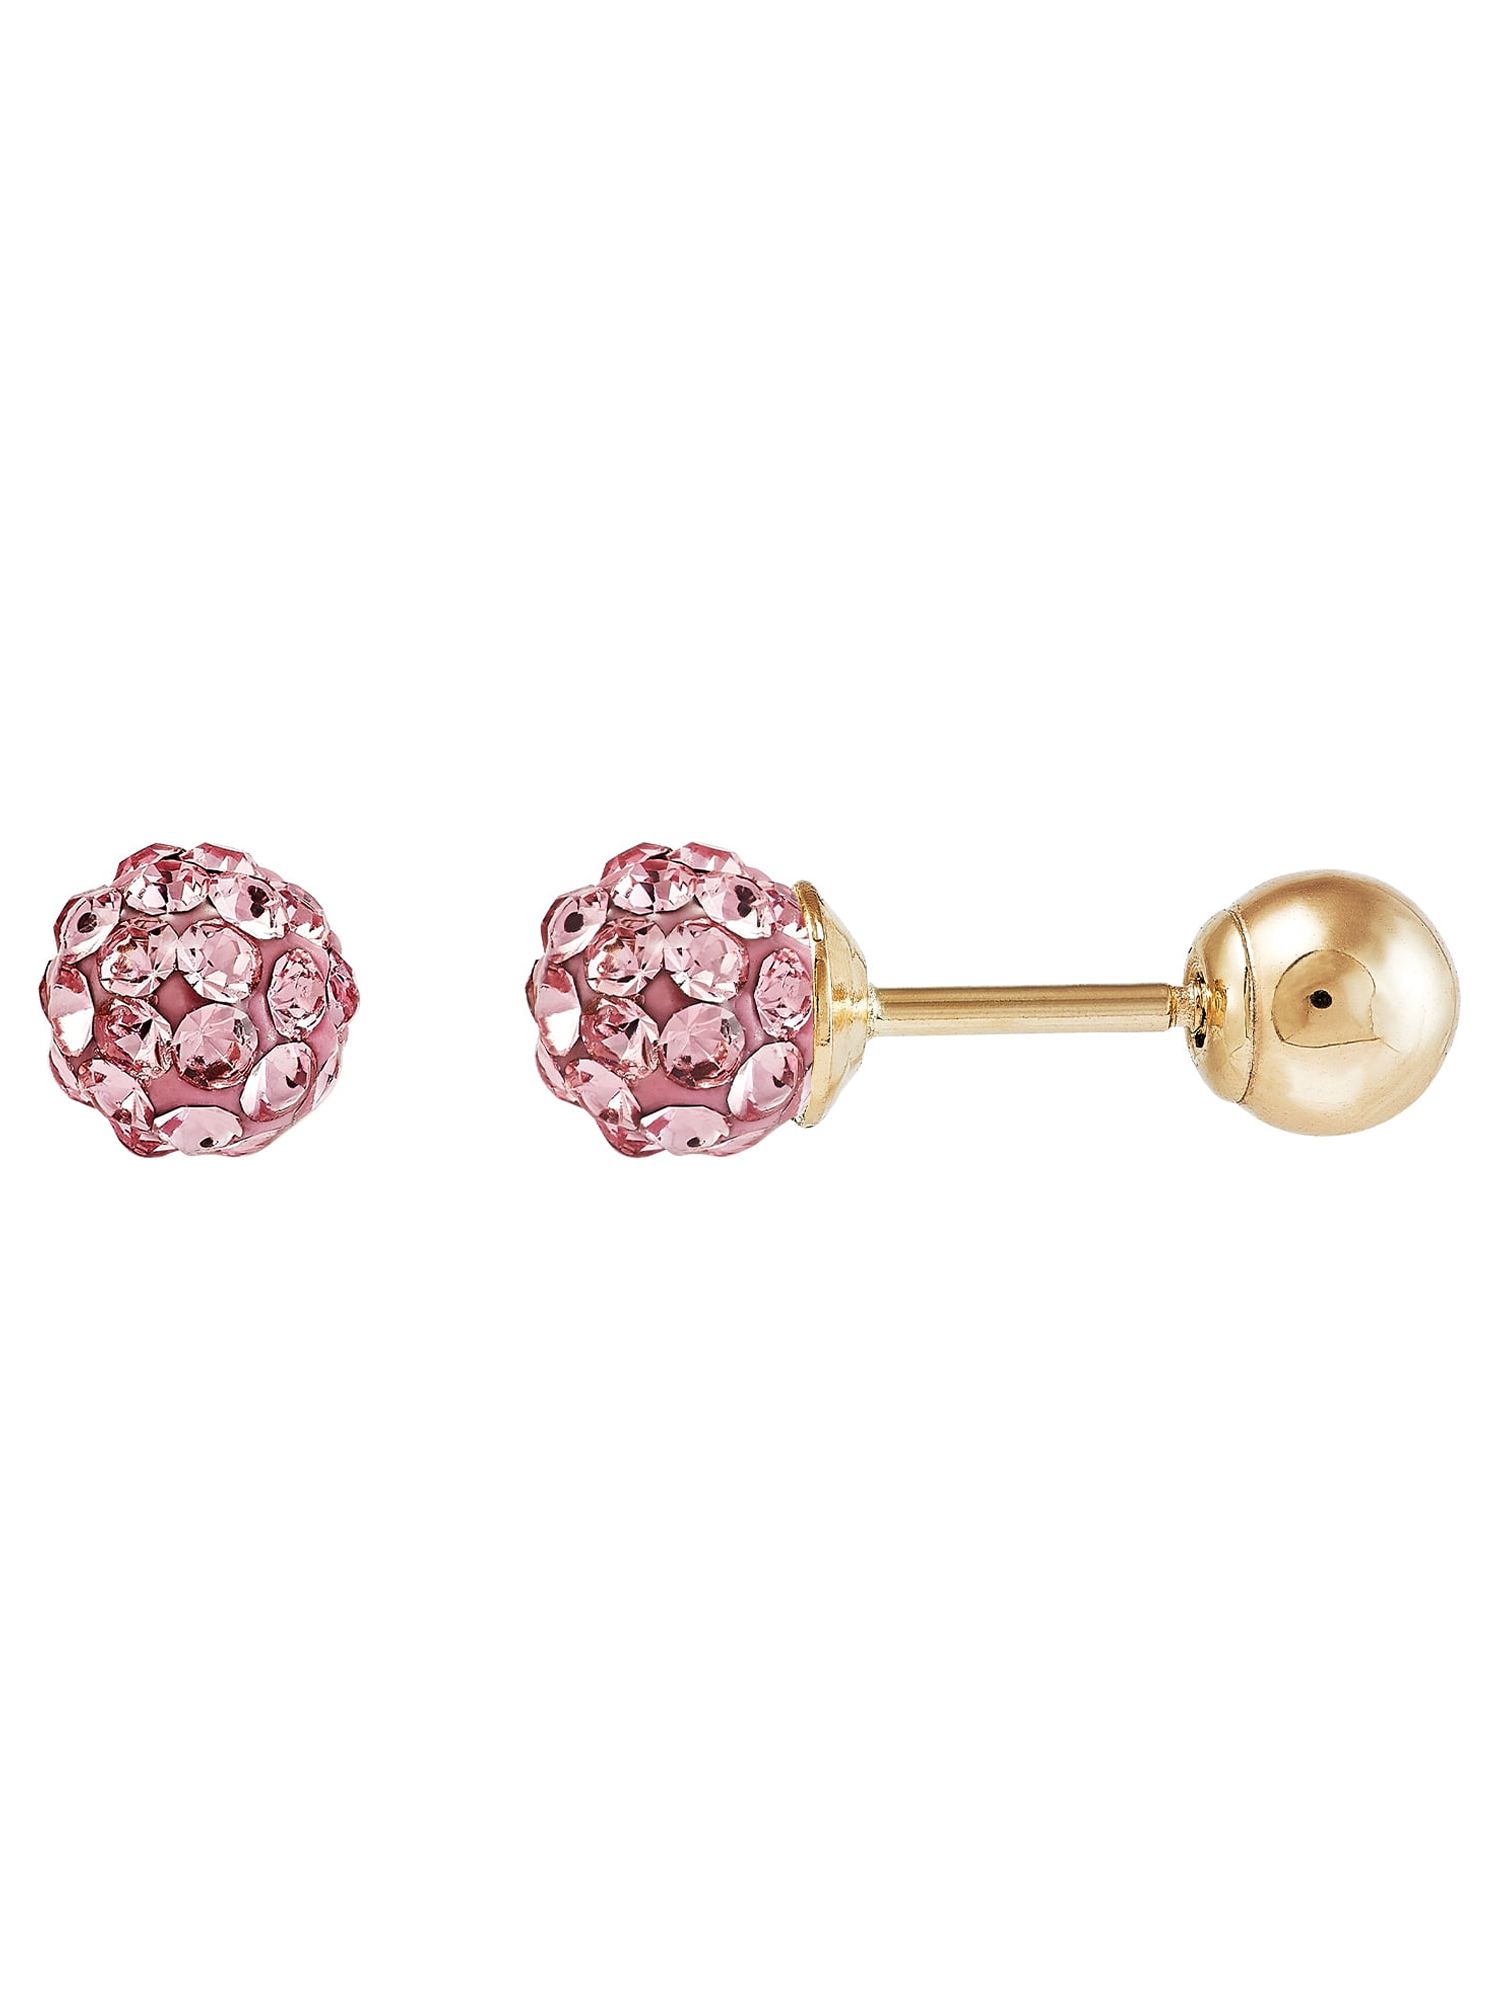 Brilliance Fine Jewelry Pink Crystals 4.8MM Studs Earrings in 10K Yellow Gold - image 1 of 10